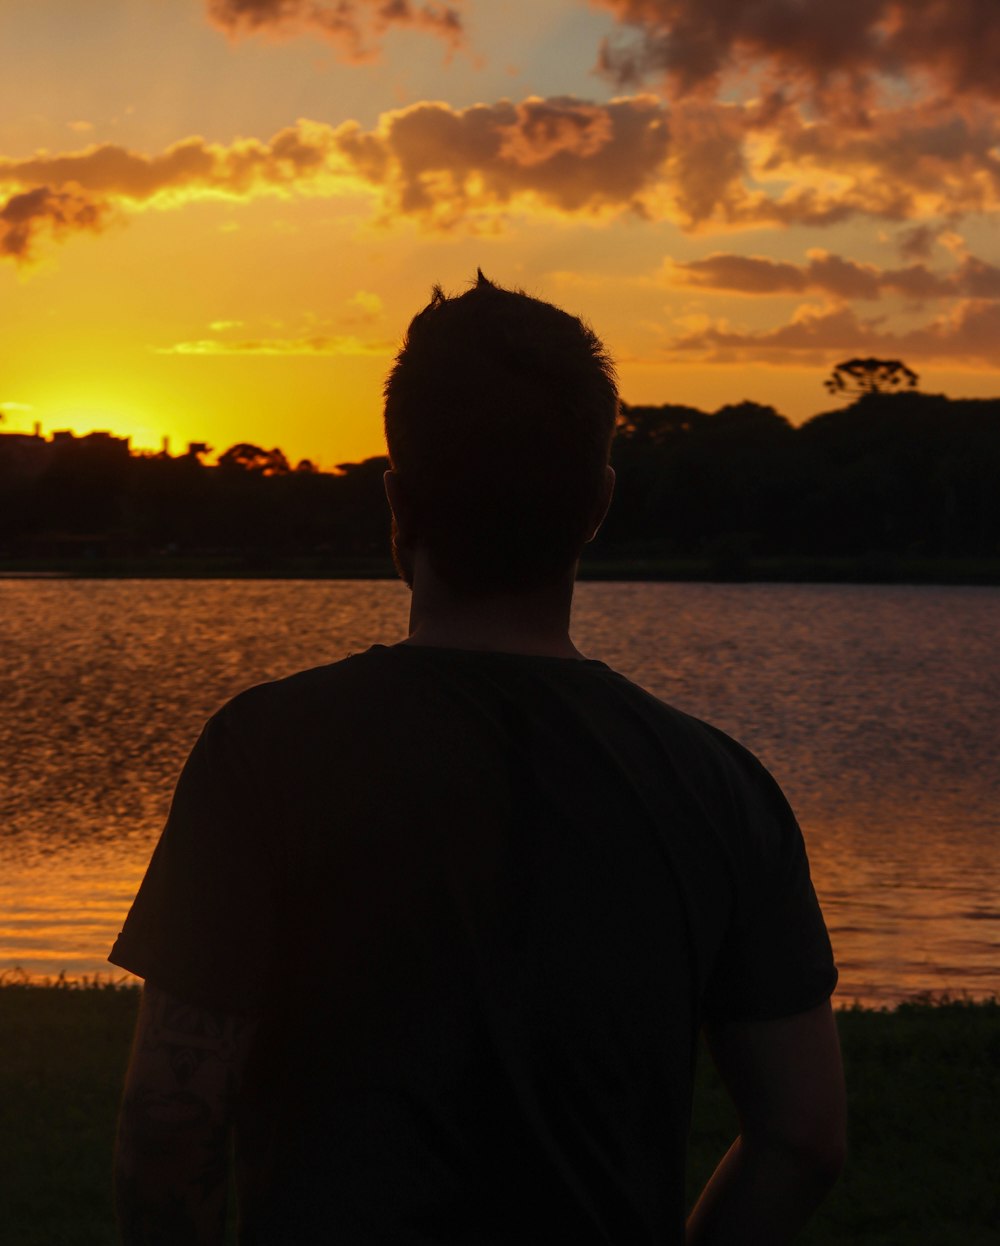 man in black shirt standing near body of water during sunset